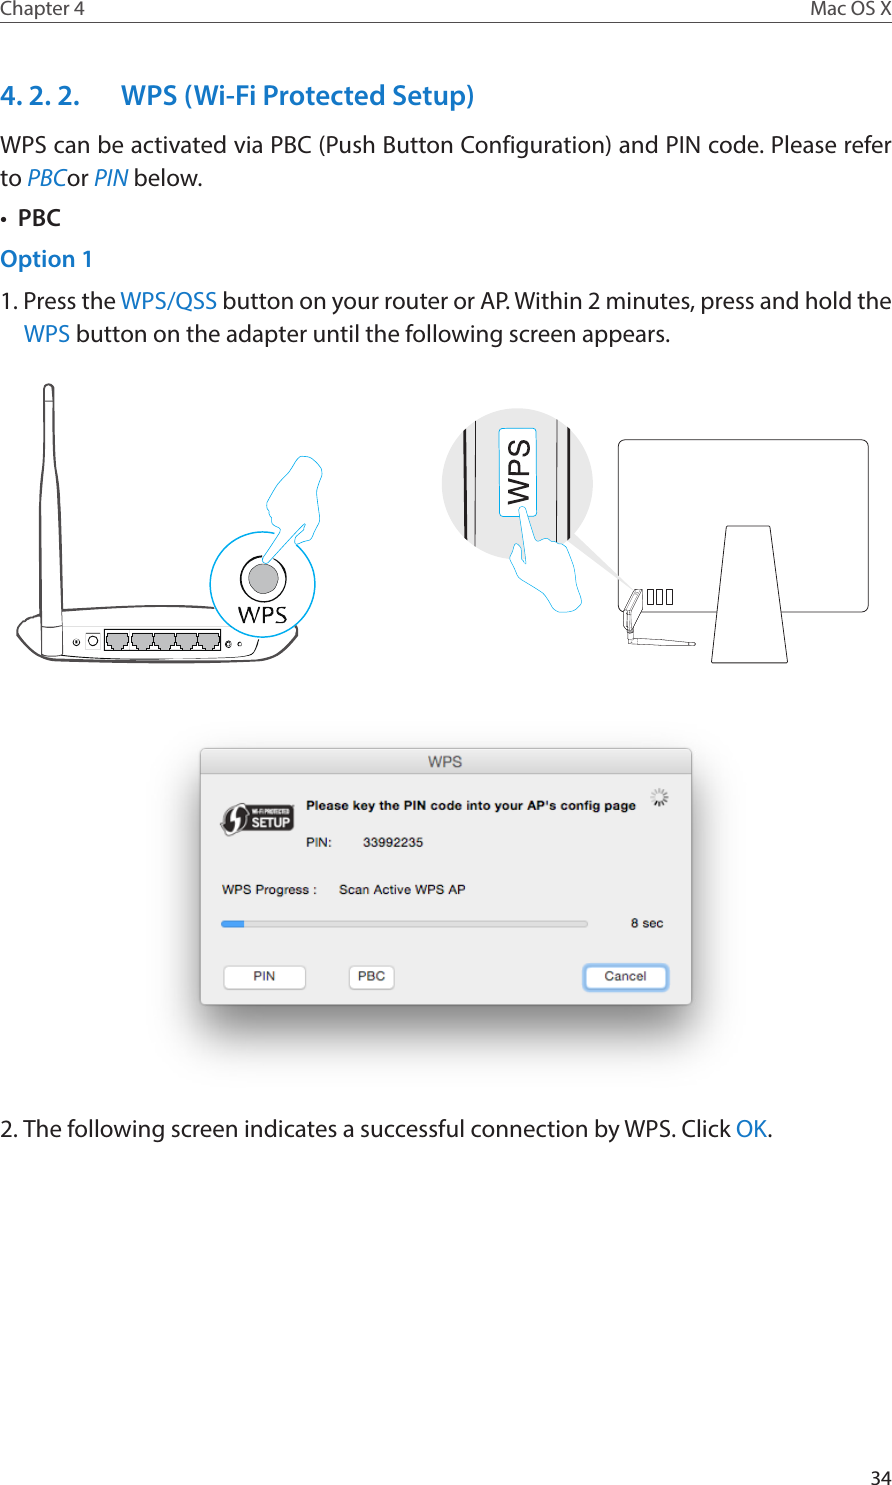 34Chapter 4 Mac OS X4. 2. 2.  WPS (Wi-Fi Protected Setup)WPS can be activated via PBC (Push Button Configuration) and PIN code. Please refer to PBCor PIN below.•  PBCOption 11. Press the WPS/QSS button on your router or AP. Within 2 minutes, press and hold the WPS button on the adapter until the following screen appears.2. The following screen indicates a successful connection by WPS. Click OK.